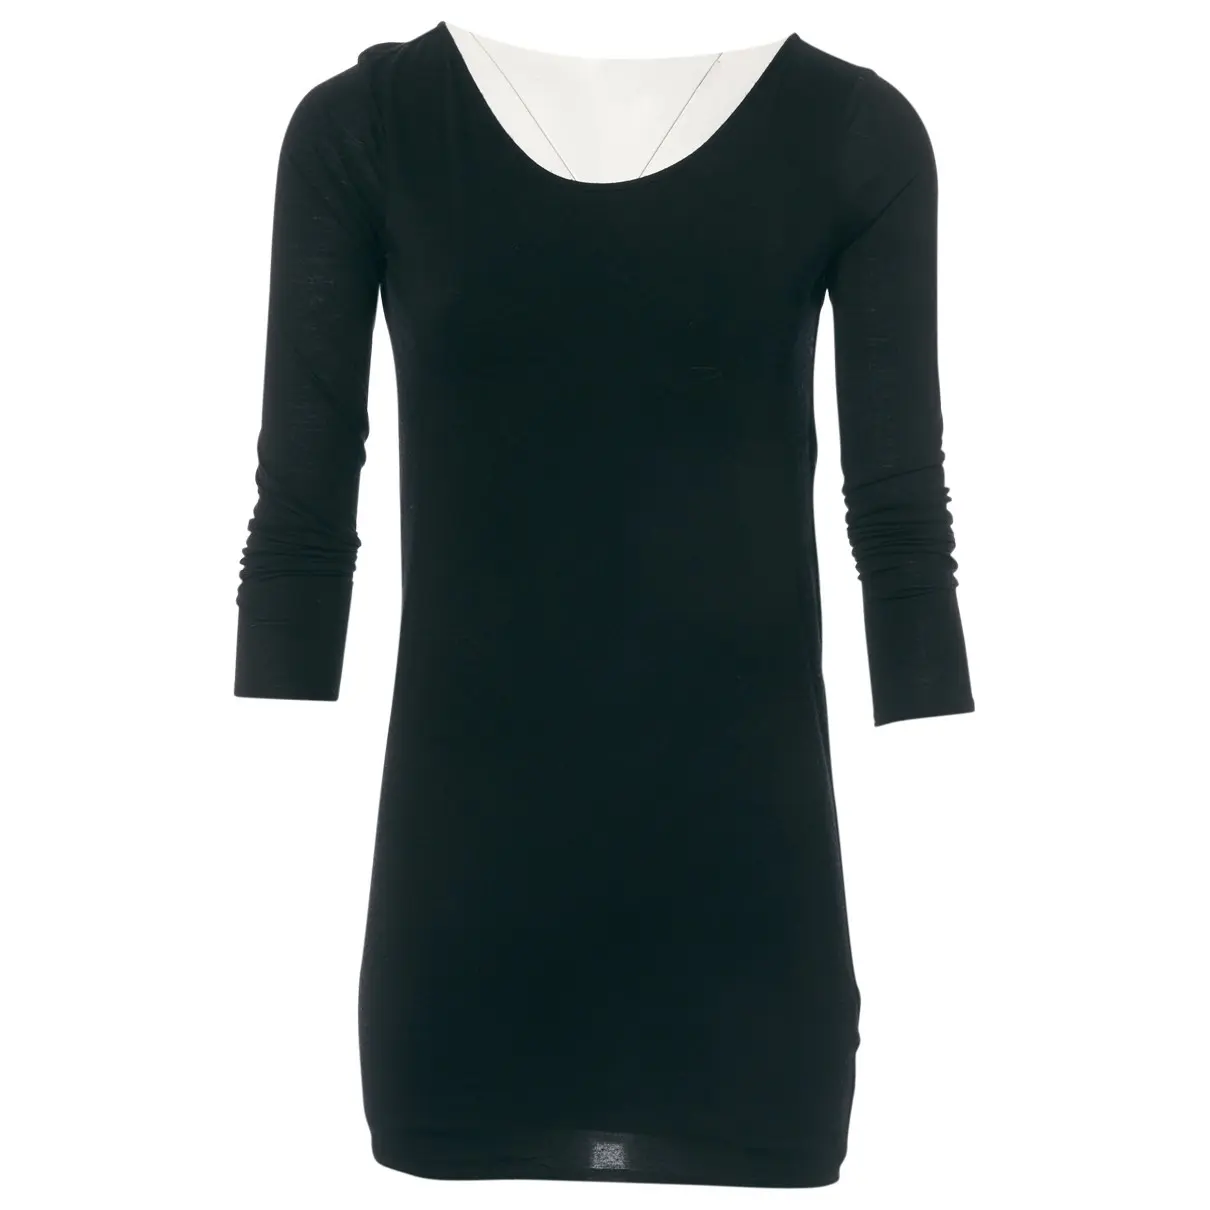 Black Synthetic Top Helmut Lang